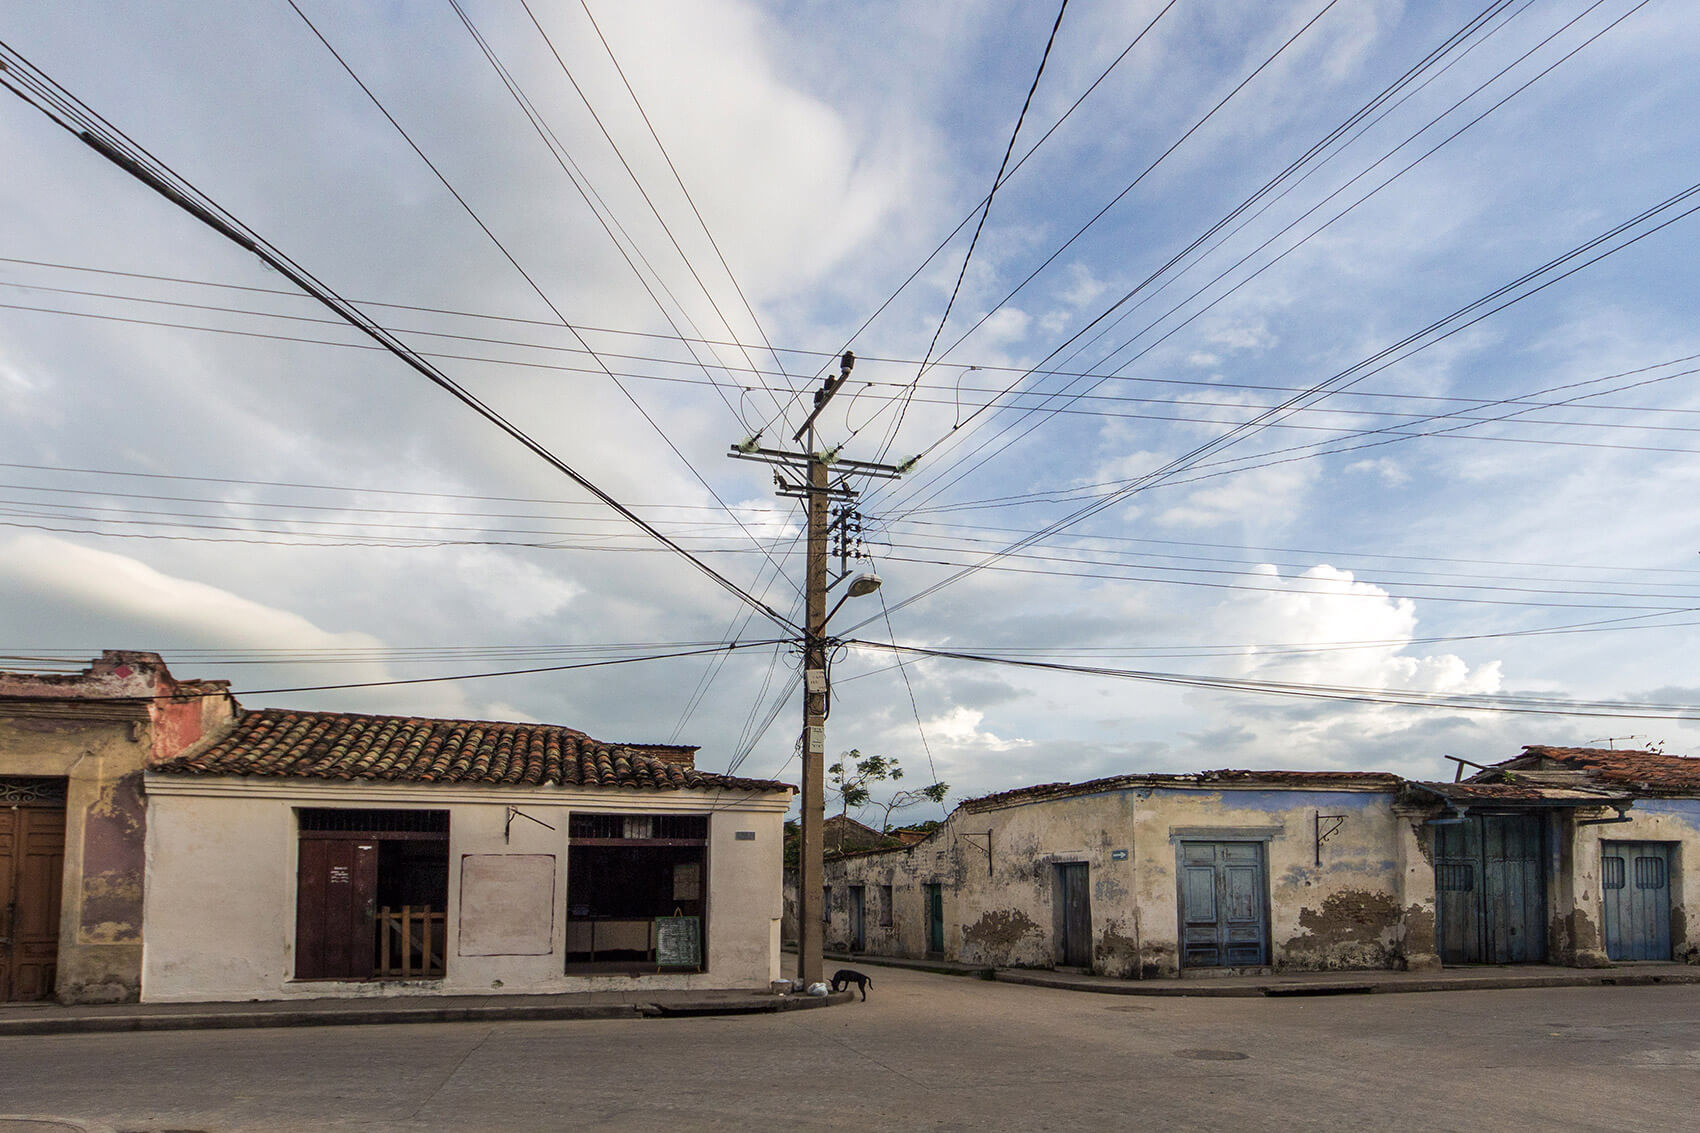 Crossroad and power cables in Camagüey